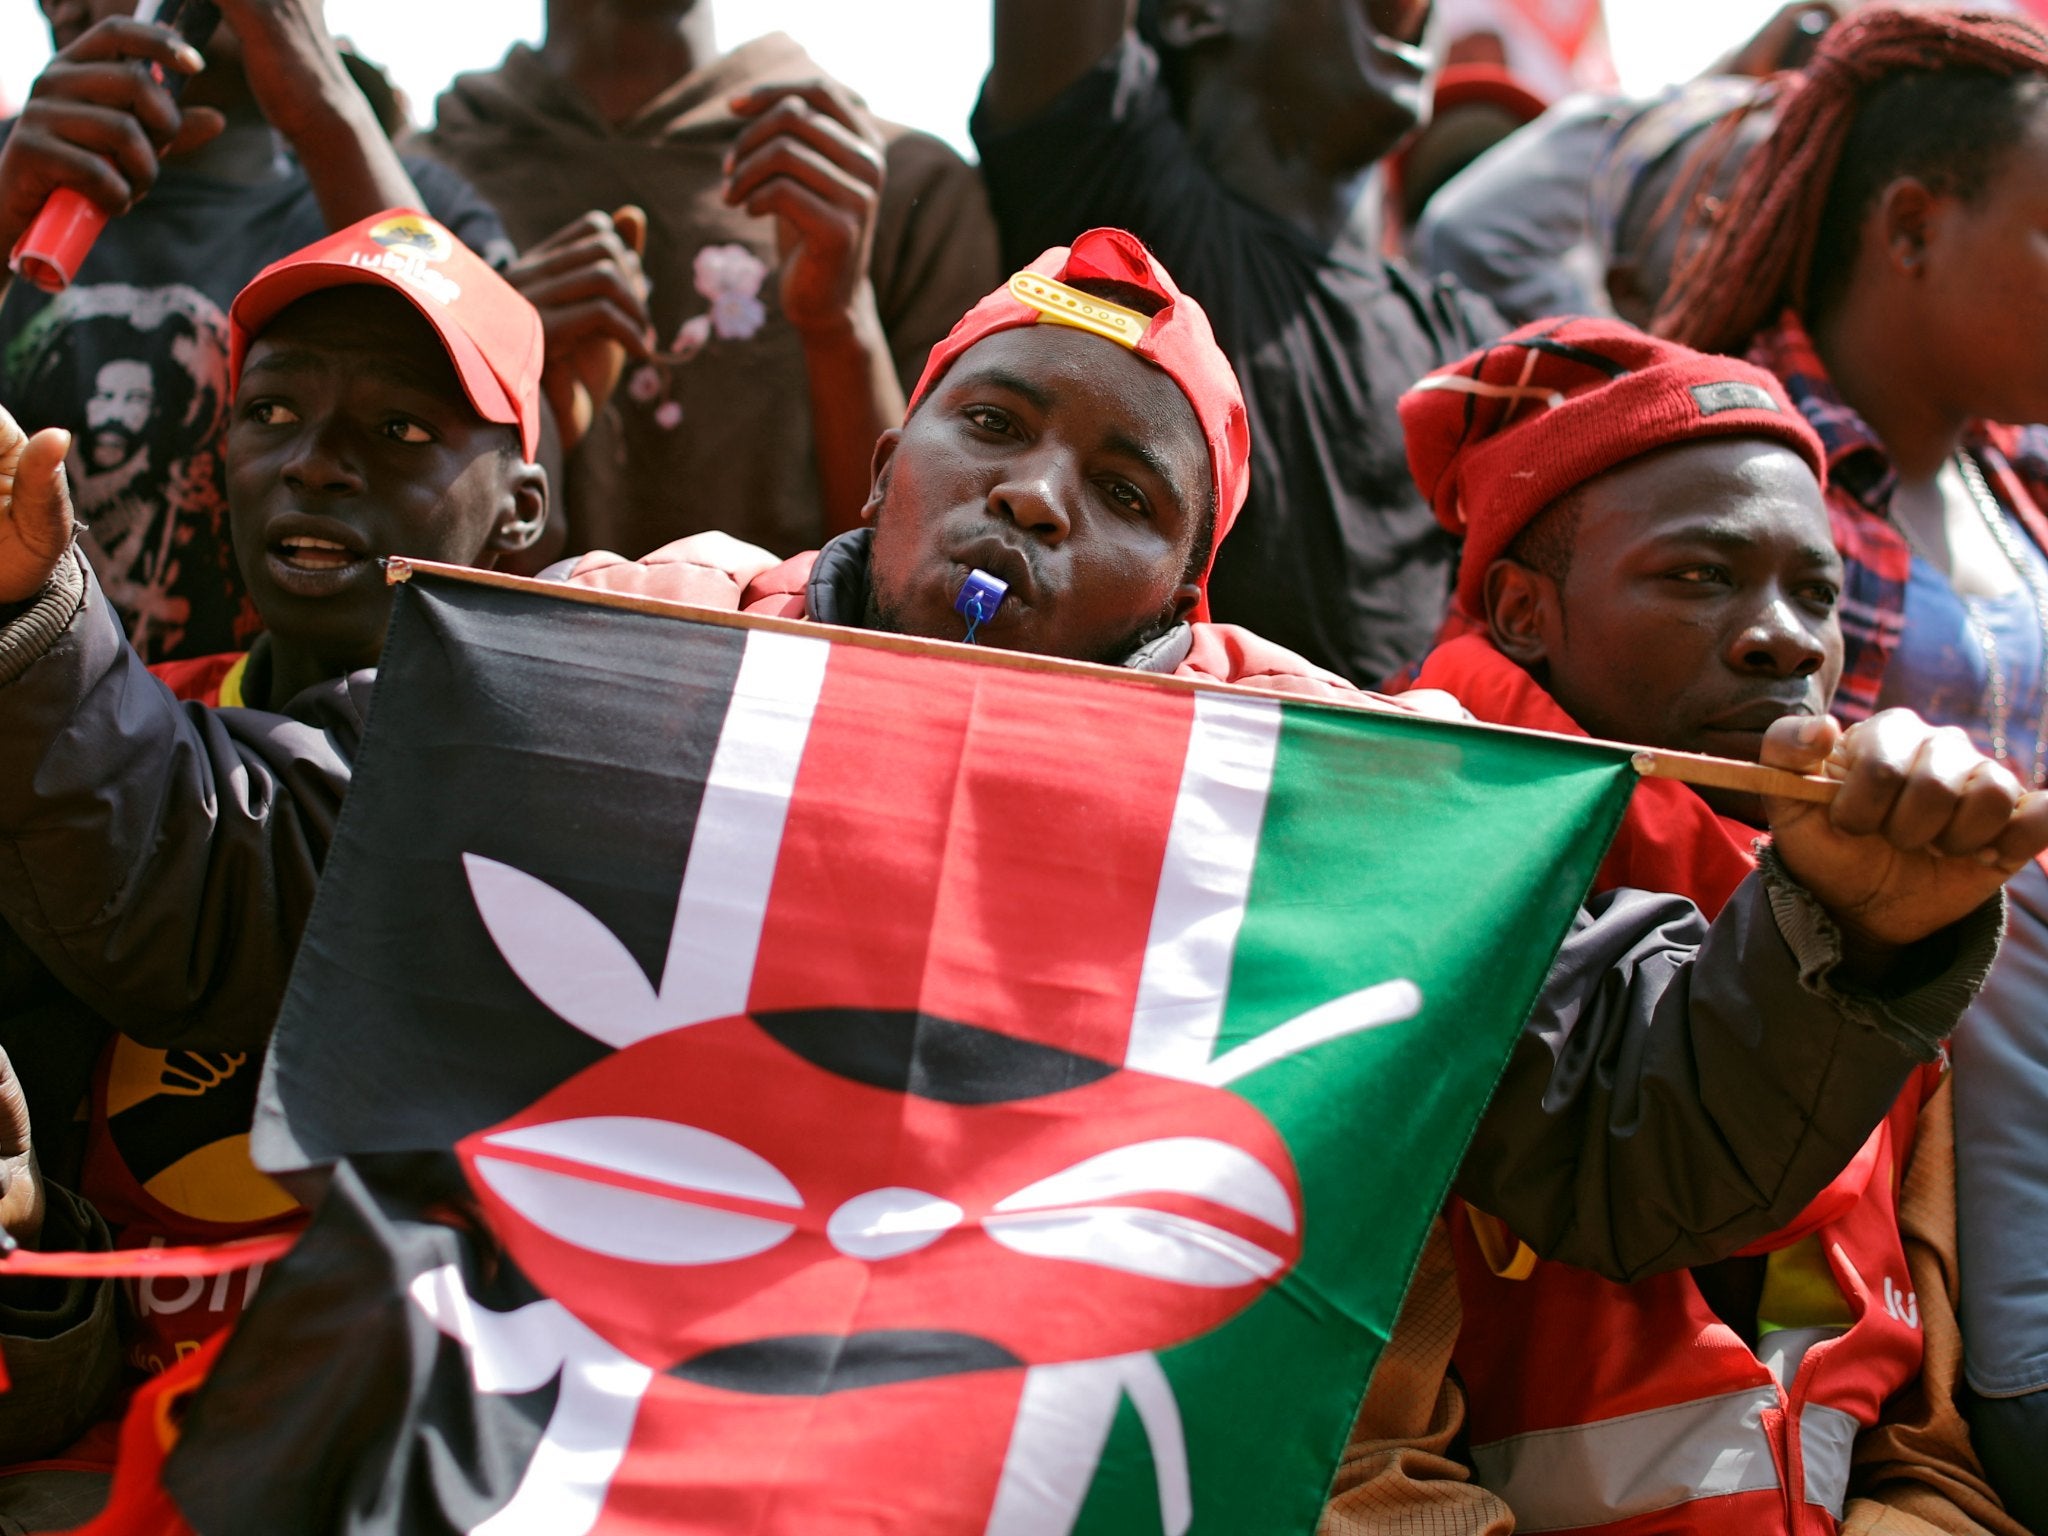 Kenya goes to the polls to vote in a tight presidential election on 8 August